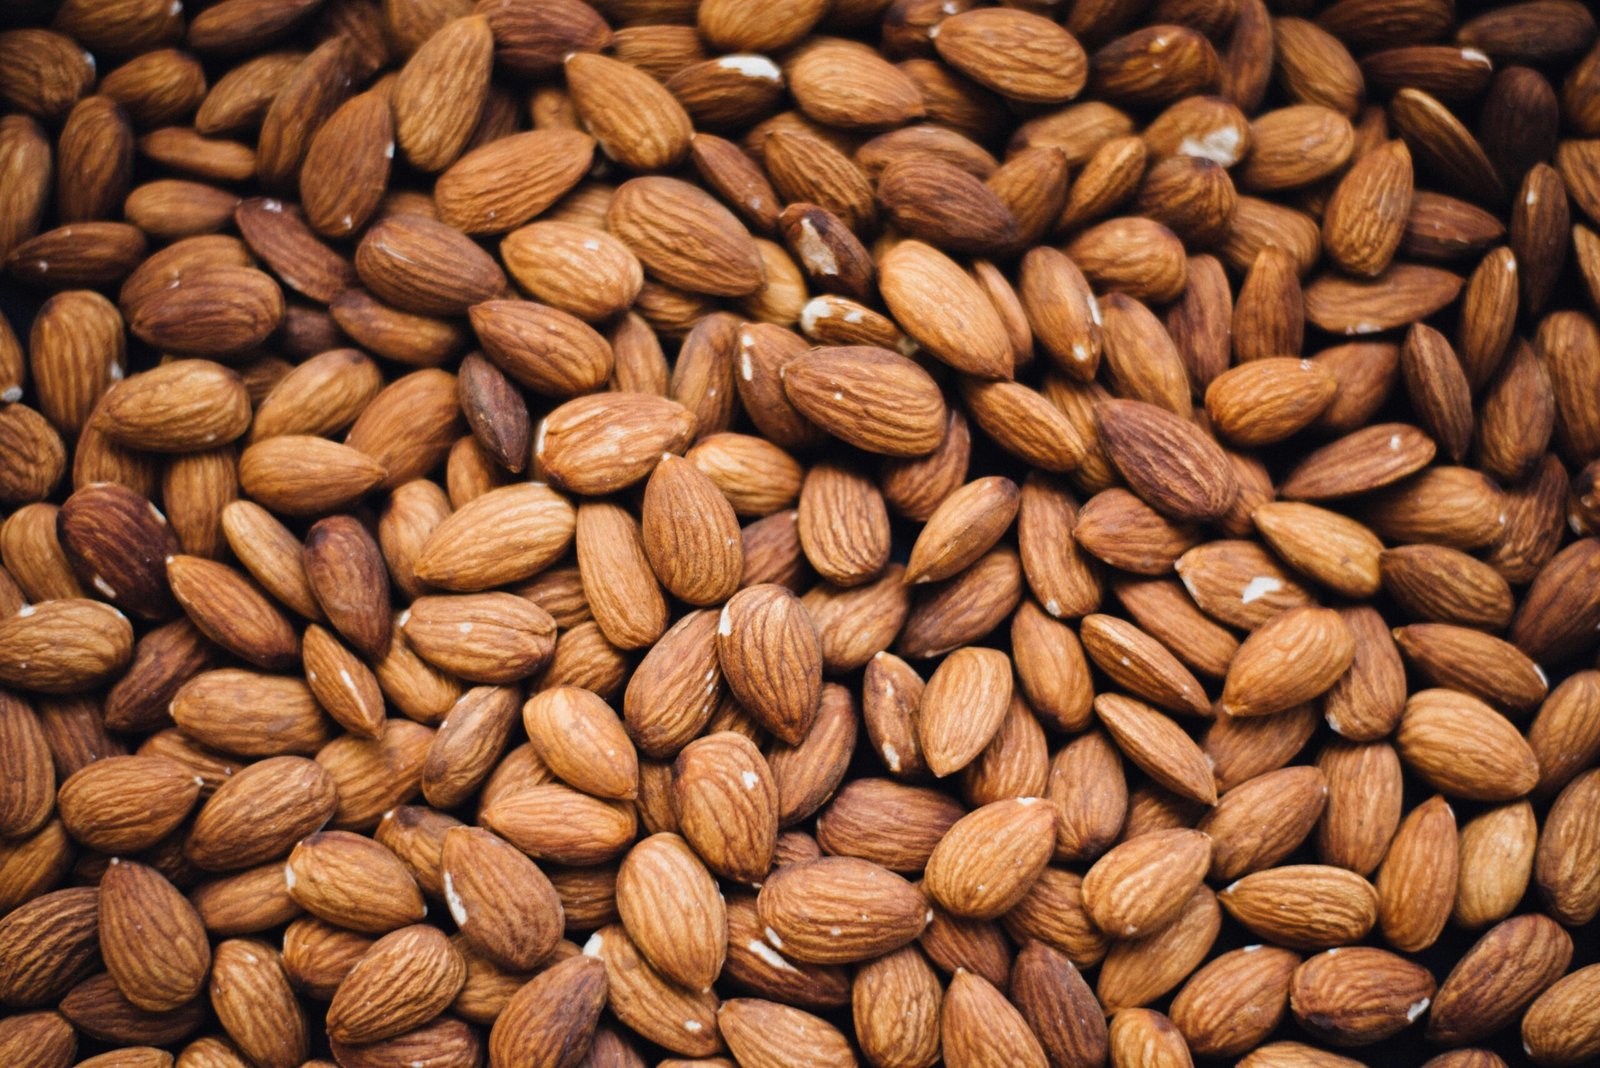 The Health Benefits of Eating Raw Almonds Every Day